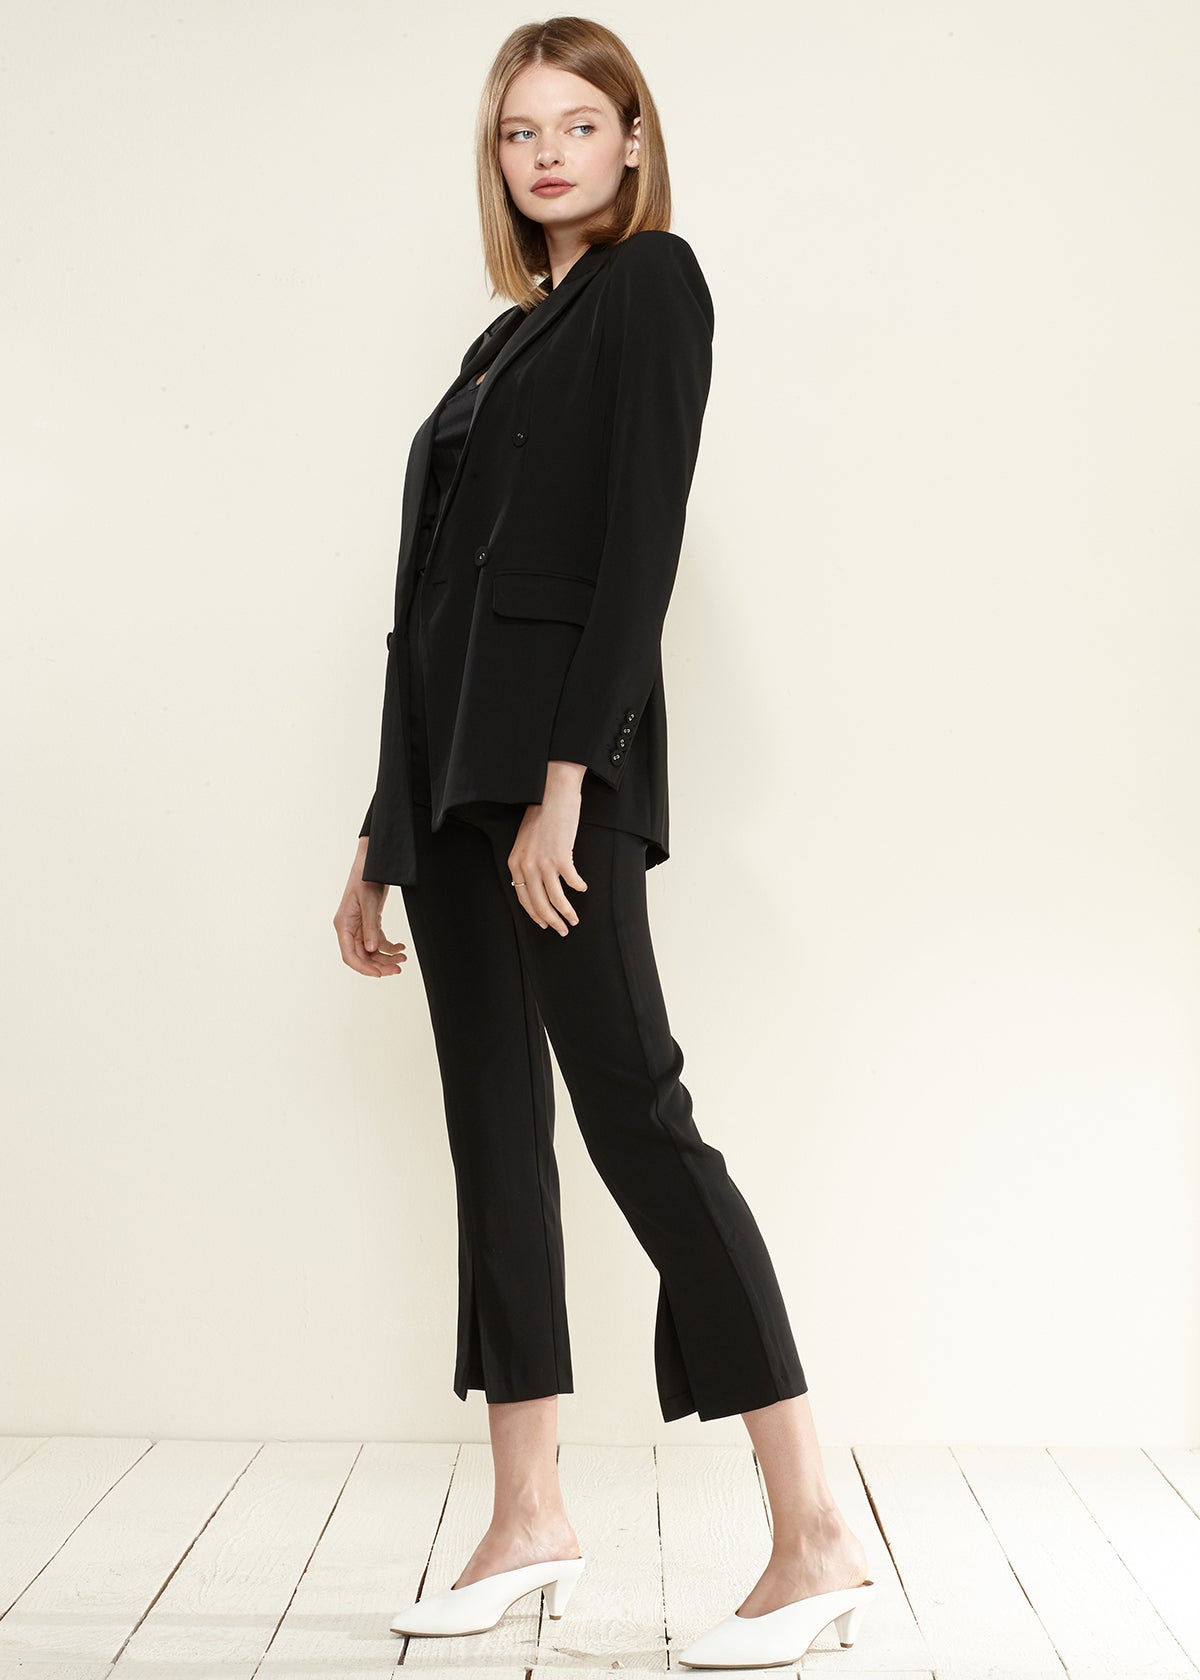 Women's Double Breasted Blazer by Shop at Konus